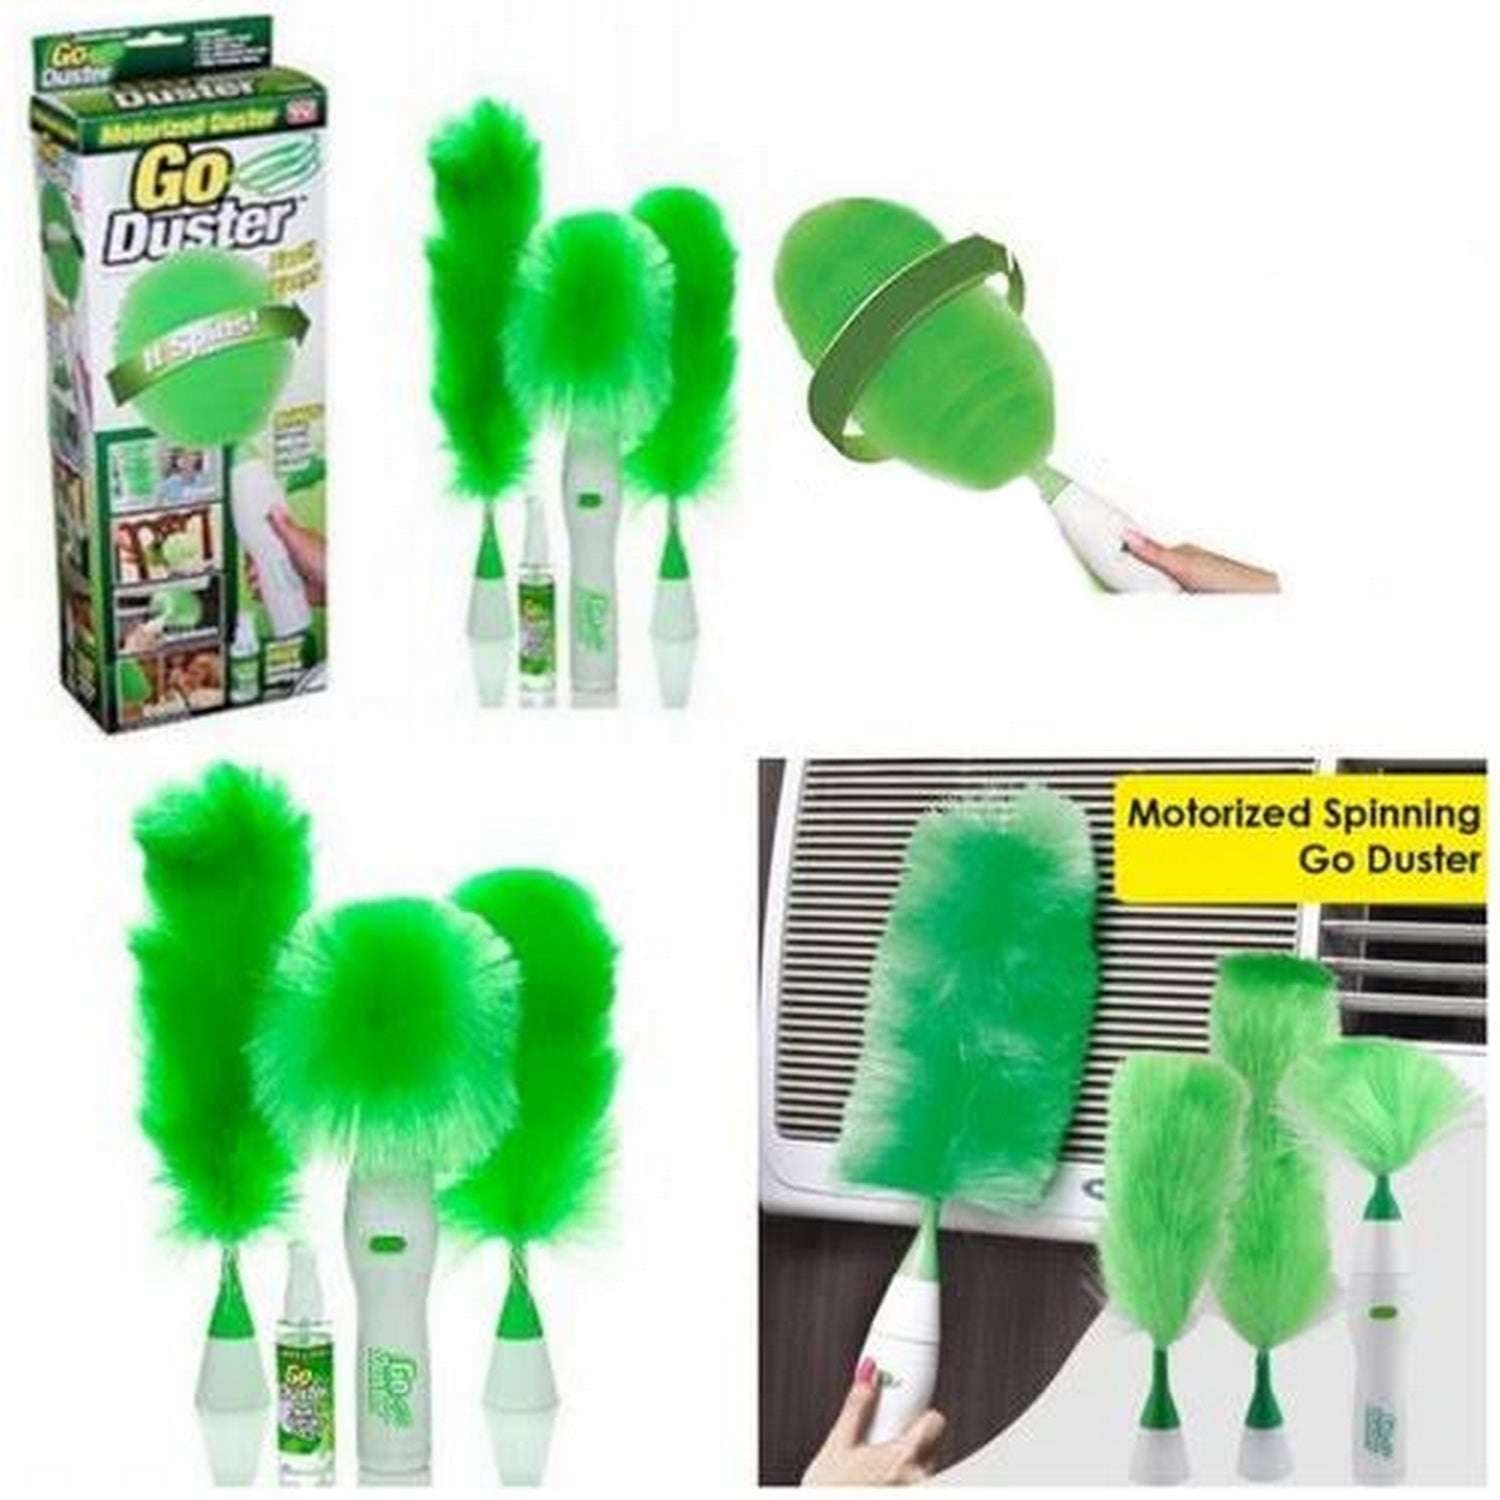 Go Duster Cleaning Makes Dusting Fast Easy Fun - FlyingCart.pk